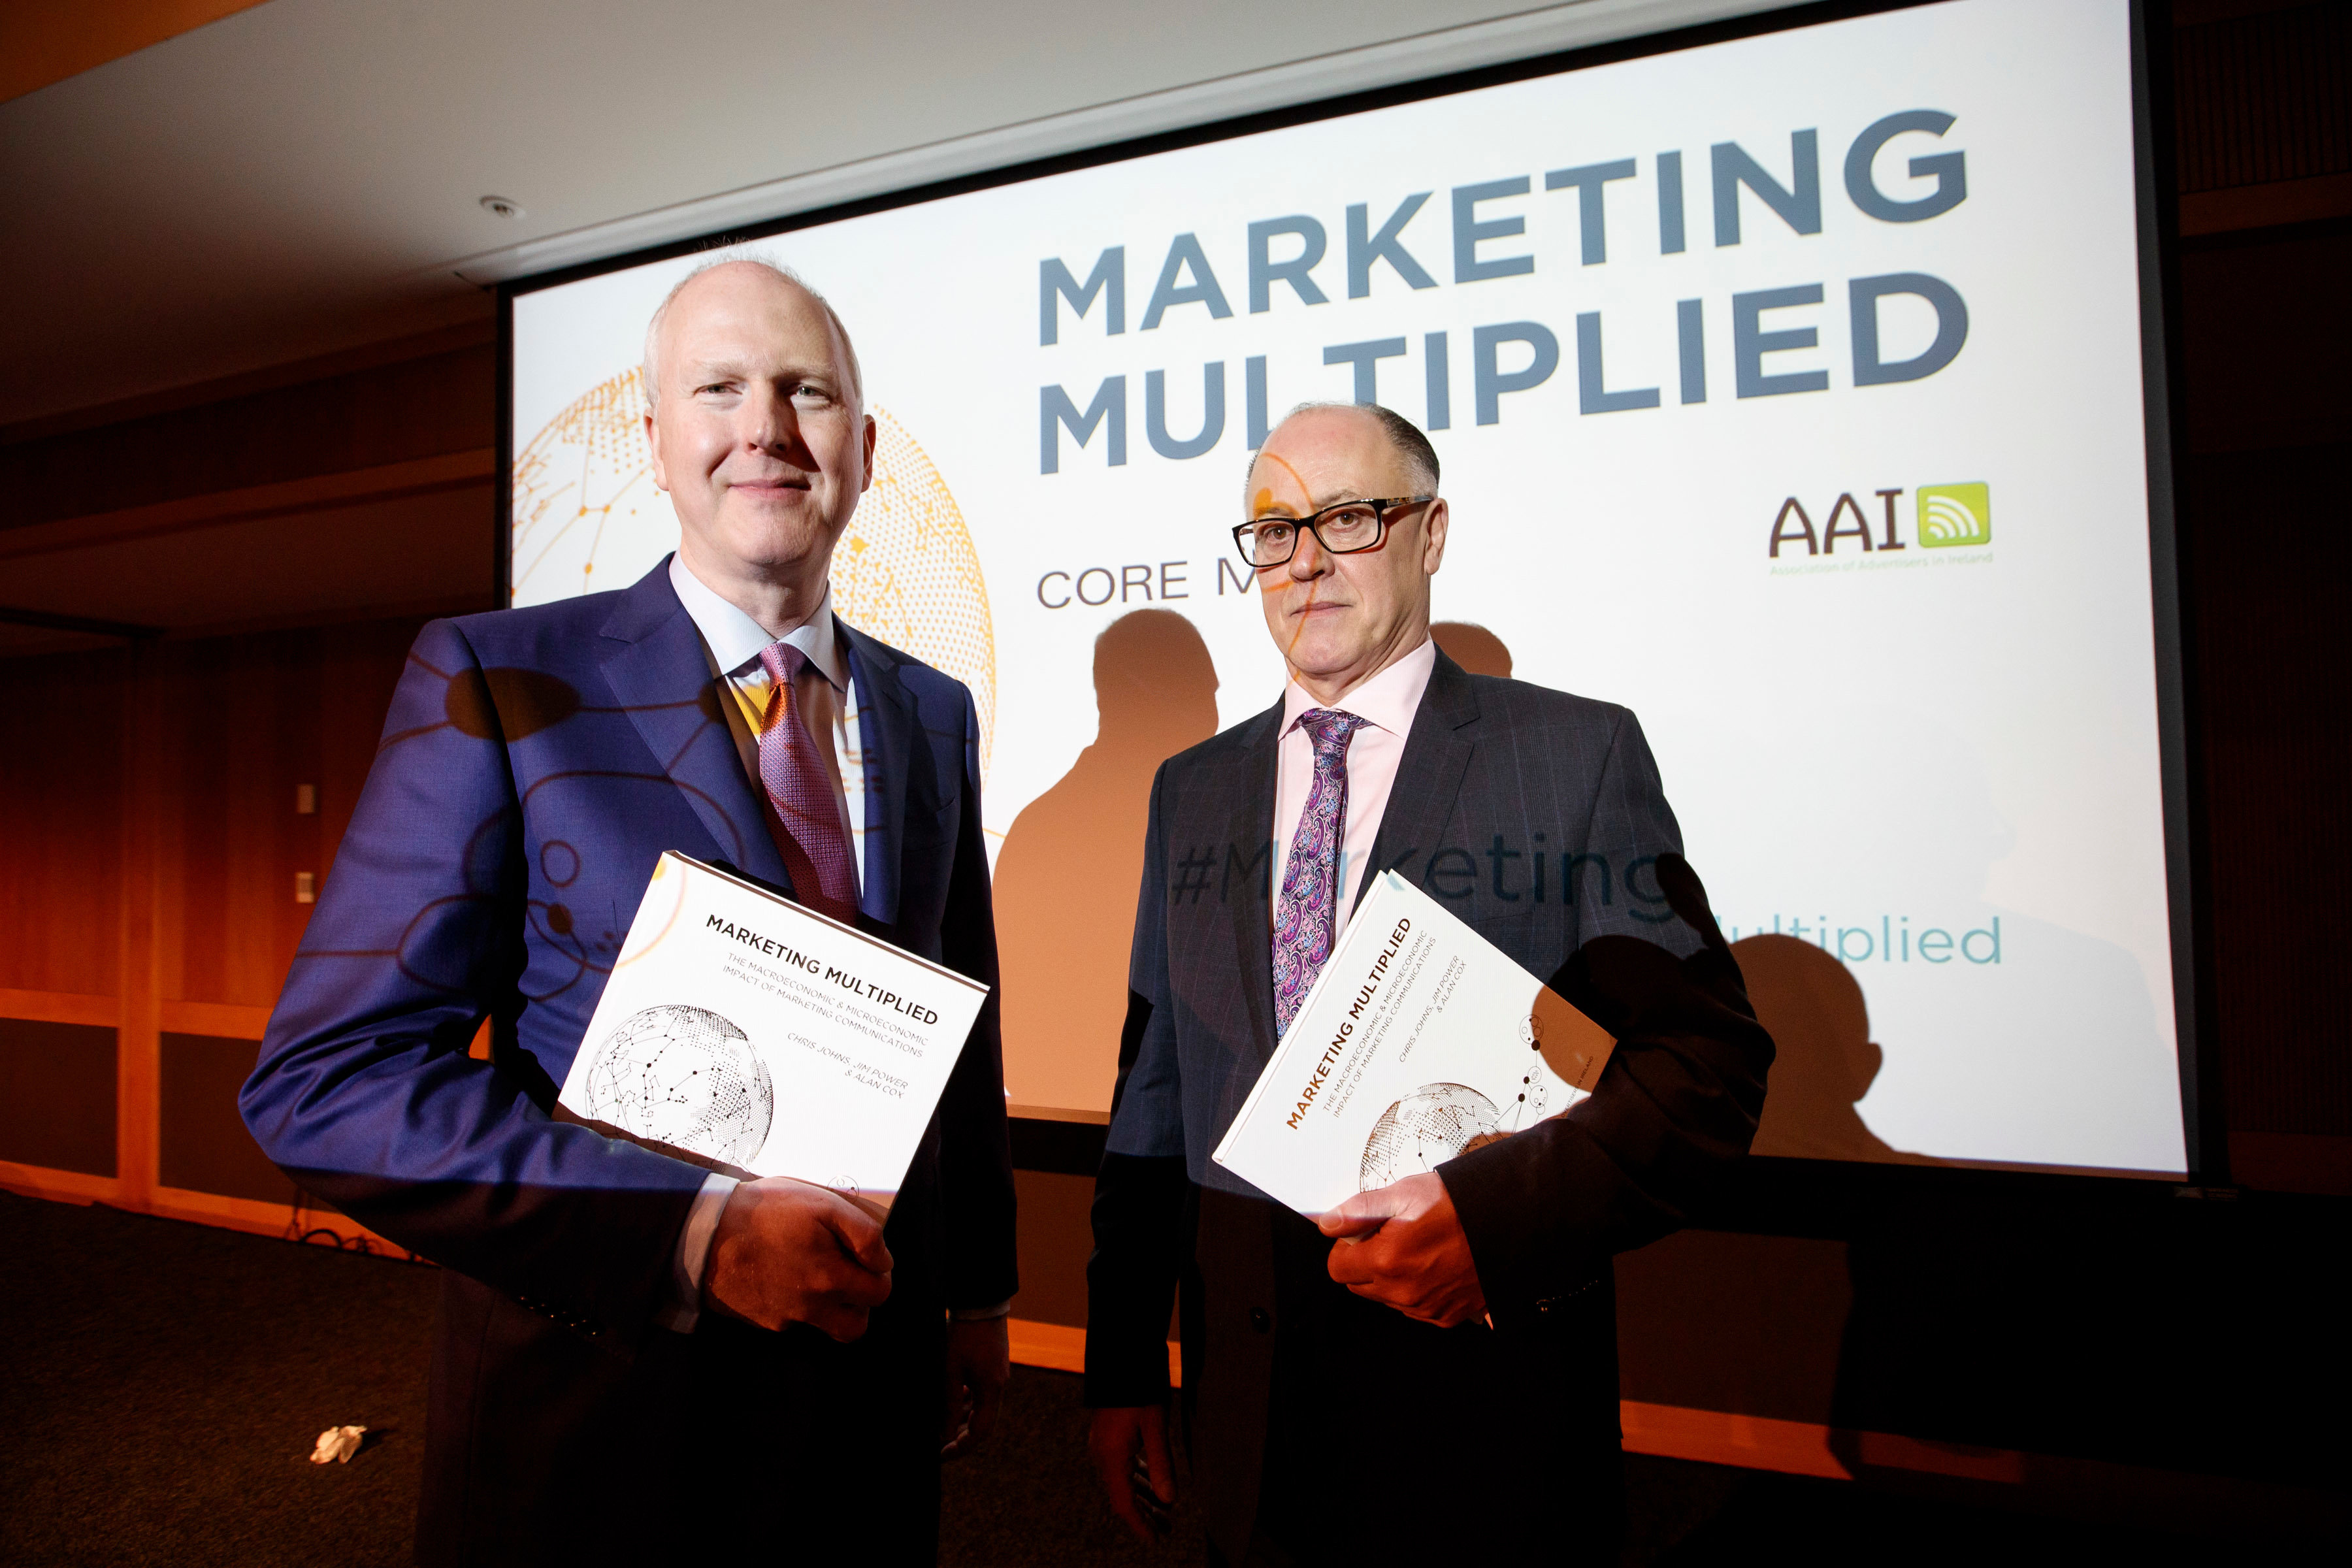 Alan Cox, CEO of Core Media and Barry Dooley, CEO of the AAI at the launch of 'Marketing Multiplied' 2